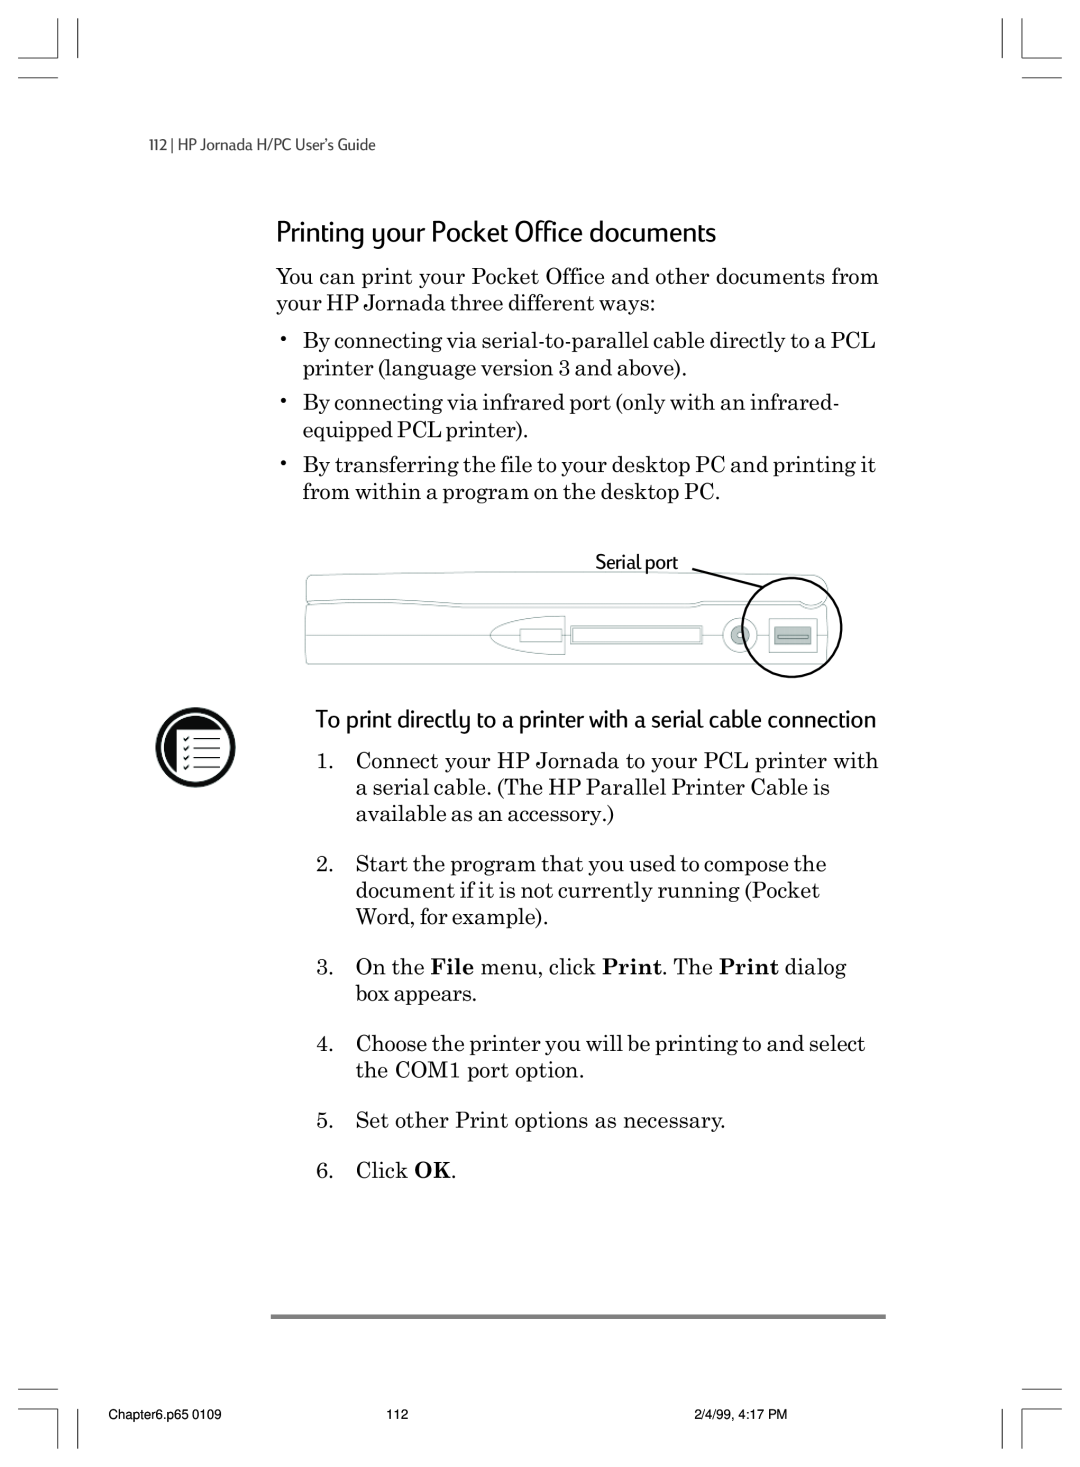 HP 820 E manual Printing your Pocket Office documents, To print directly to a printer with a serial cable connection 